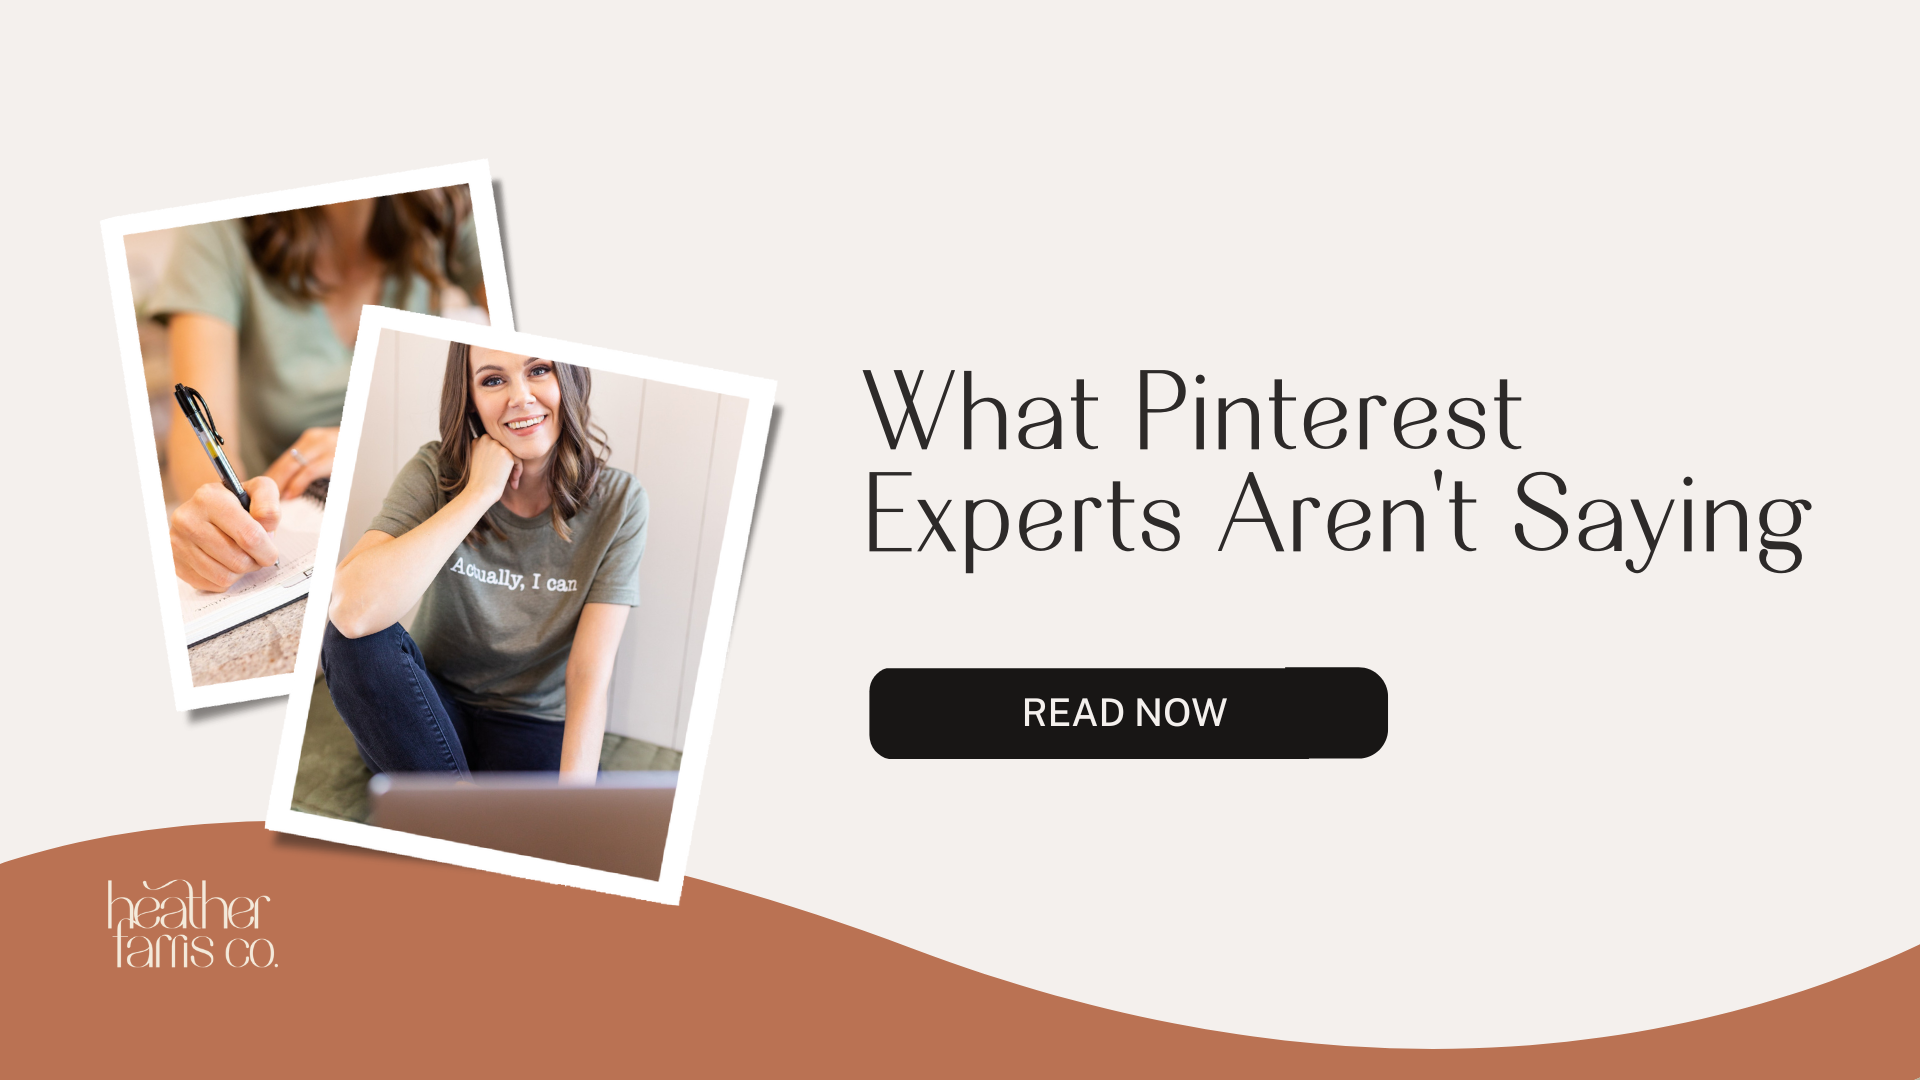 What Pinterest Experts Aren't Saying